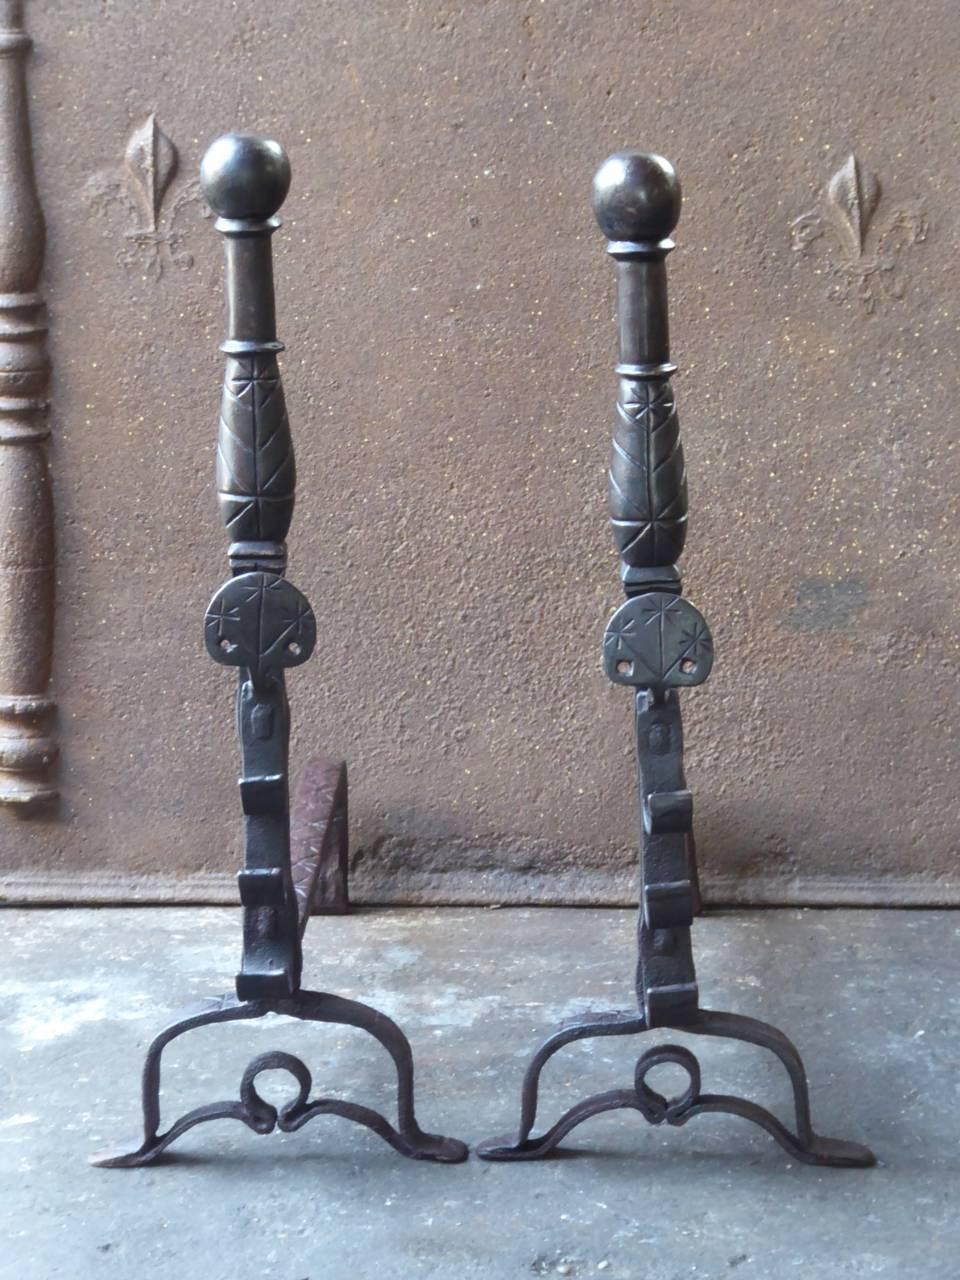 17th century French Louis XIII andirons or landiers made of wrought iron. This is a so called wedding pair, whereby both parties each donate one andiron made by the same blacksmith. With spit hooks.

We have a unique and specialized collection of